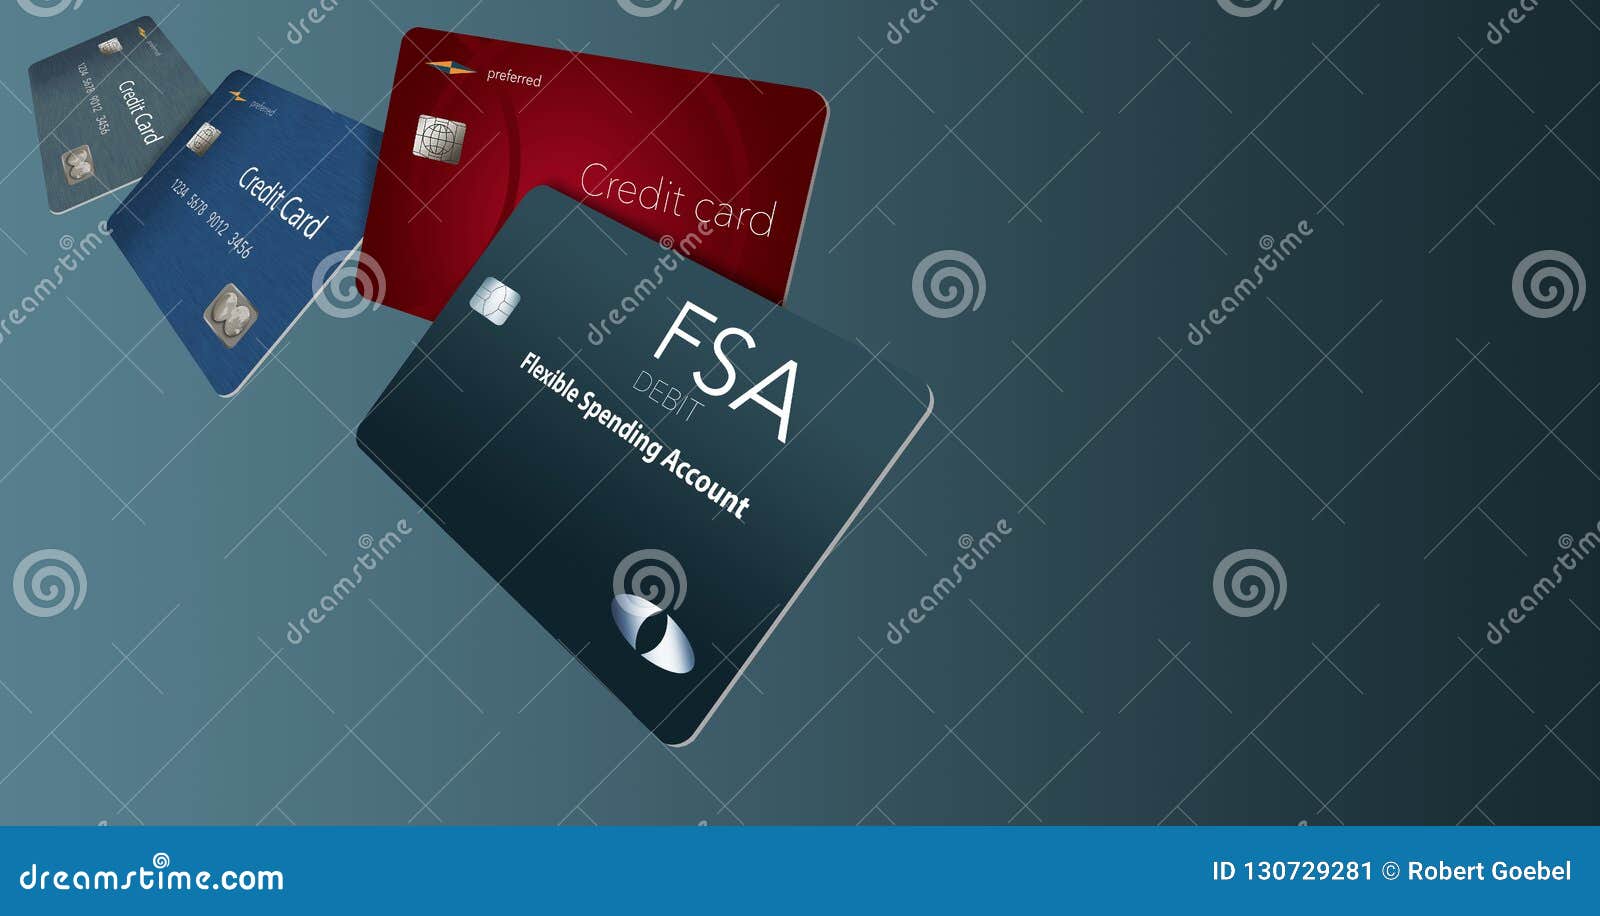 Here Is A Flexible Spending Account Debit Card Shown With Credit Cards In The Background. Stock ...